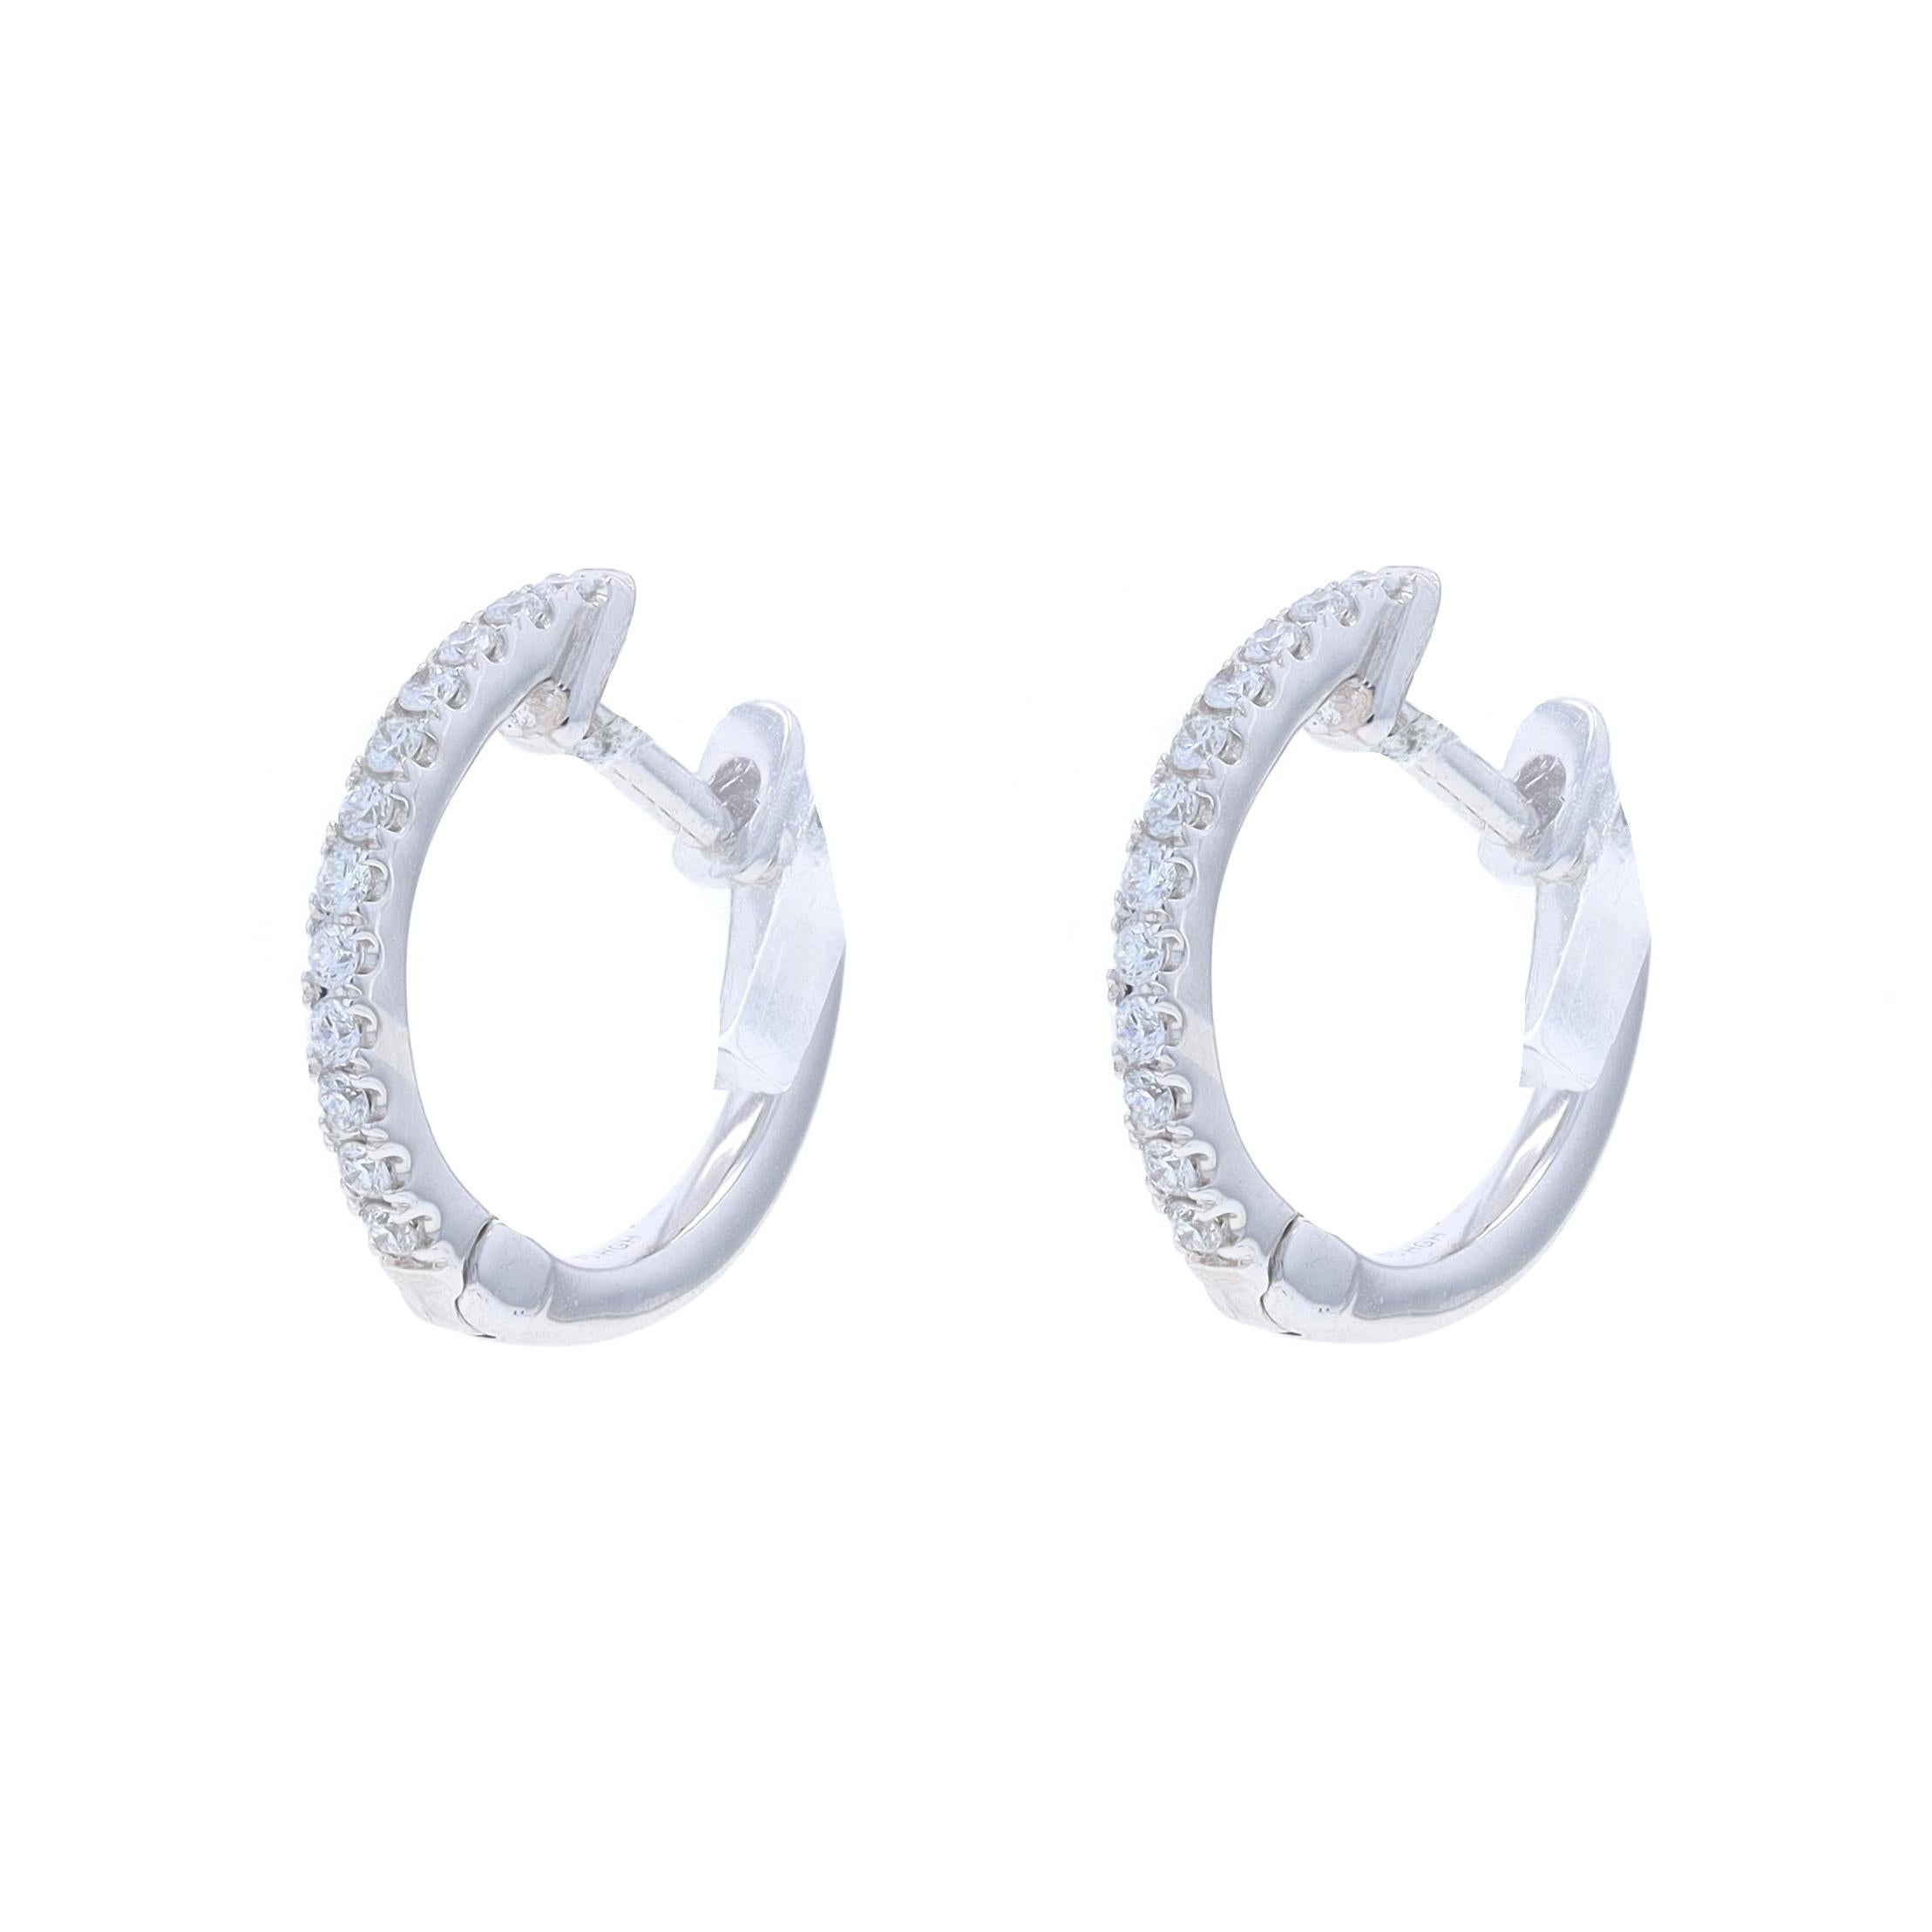 Metal Content: 14k White Gold

Stone Information

Natural Diamonds
Carat(s): .12ctw
Cut: Round Brilliant
Color: G
Clarity: VS2 - SI1

Total Carats: .12ctw

Style: Huggie Hoop
Fastening Type: Snap Closures
Features: French Set